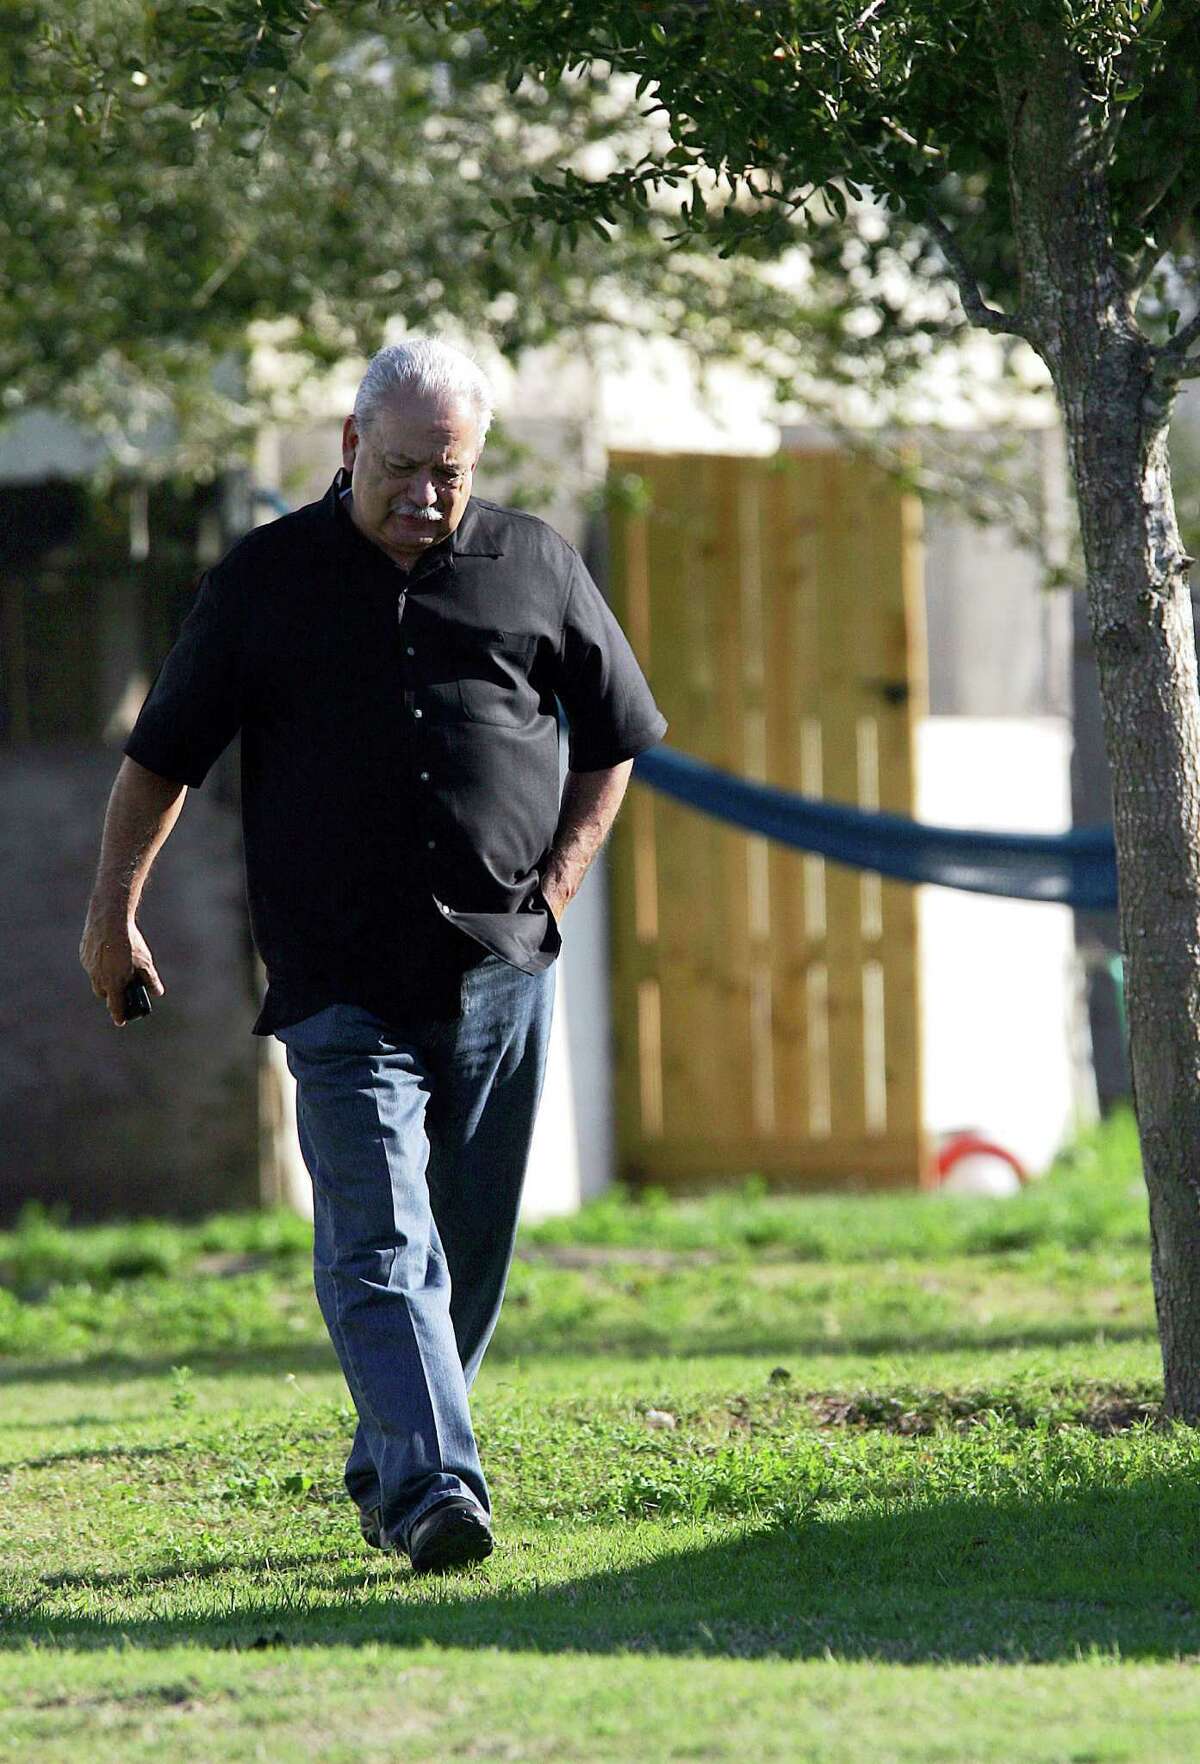 In this photo taken on Feb. 19, 2014, Hidalgo County Sheriff Lupe Trevino walks around a home that was raided north of Monte Cristo in Edinburg, Texas, as they searched for Jose Juan Mendoza after he kidnapped Juan Pedro Borjas. The Hidalgo County Sheriff office has announced Wednesday, March 26, 2014, that the Trevino's chief of staff has resigned for personal reasons, the latest high-level personnel change at an agency that has drawn the attention of federal investigators. (AP Photo/The Monitor, Gabe Hernandez) MAGS OUT; TV OUT